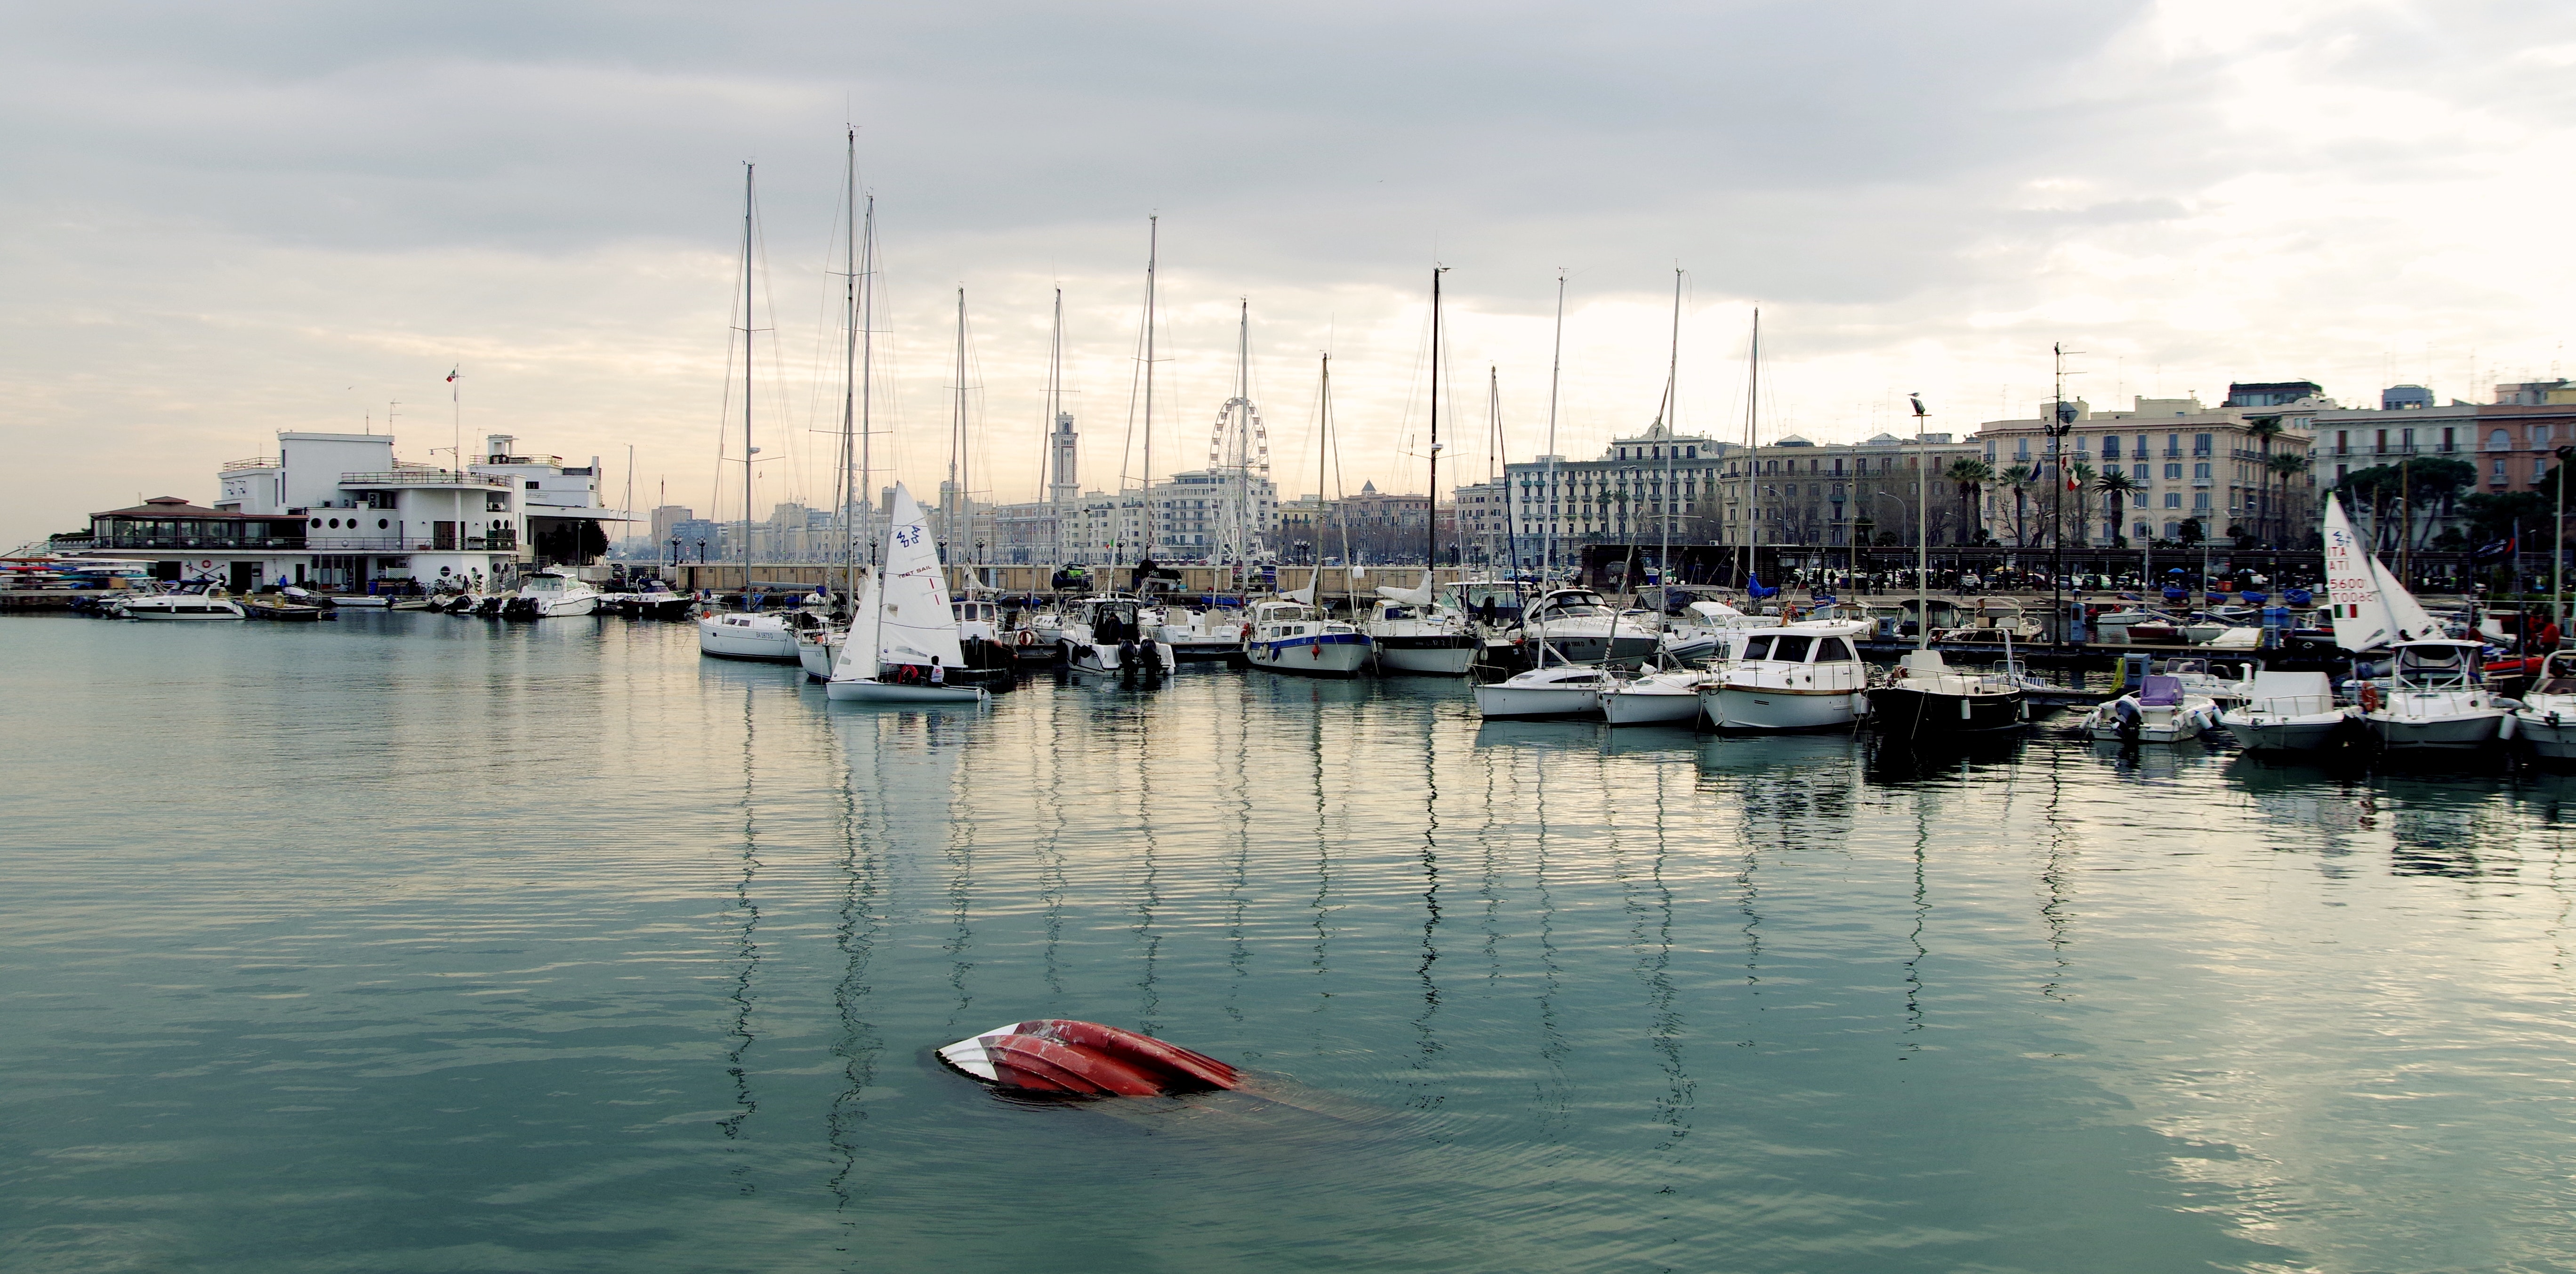 White Power Boat and Yacht Parked on Body of Water, Bay, Port, Waterfront, Watercrafts, HQ Photo